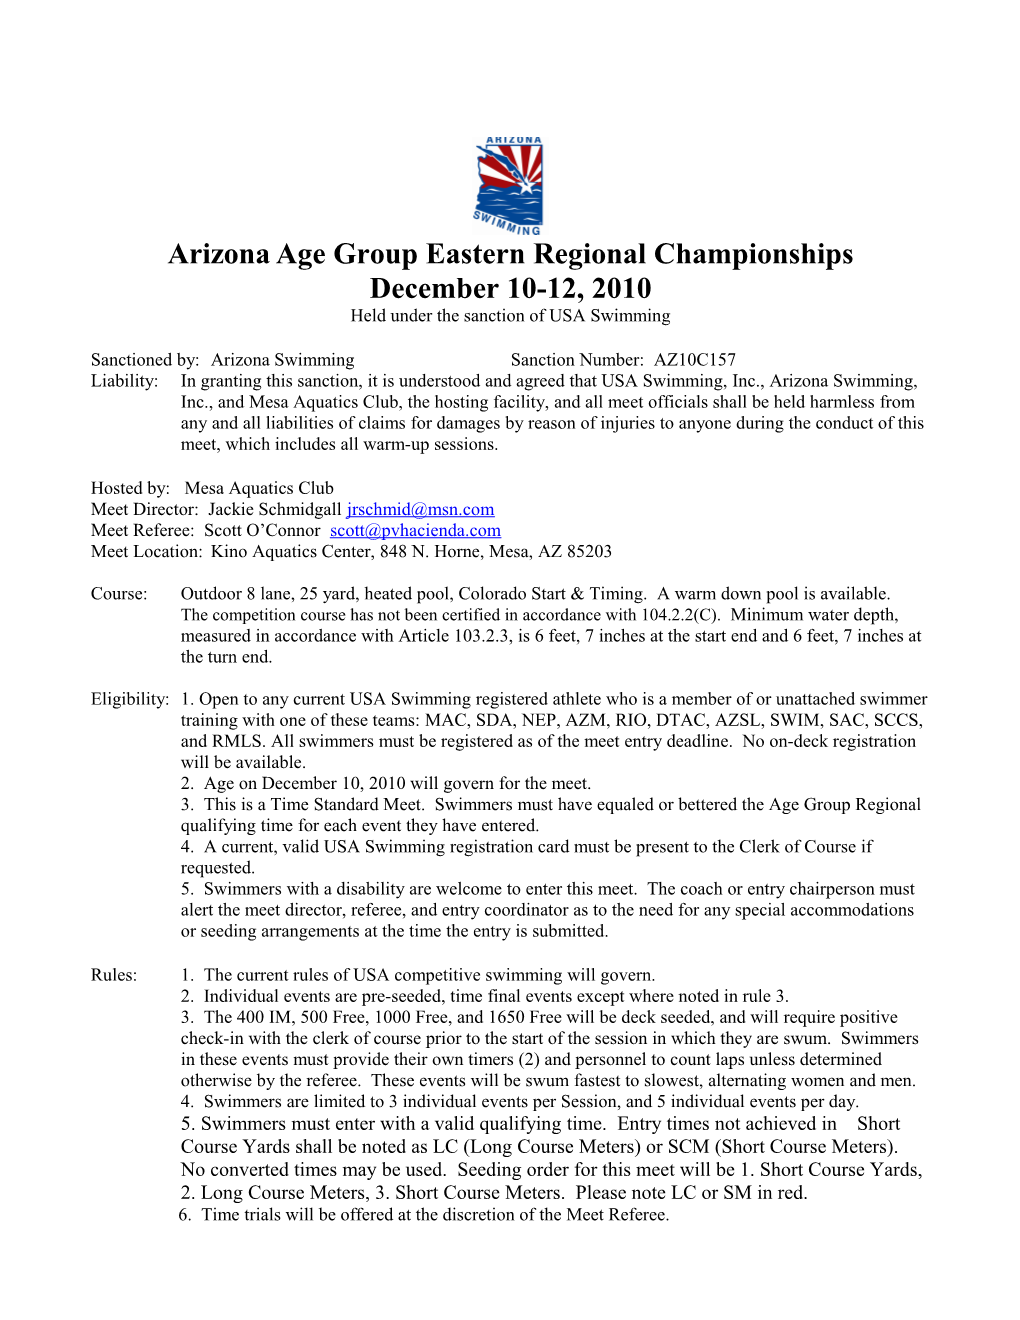 Age Group Central Regional Championships